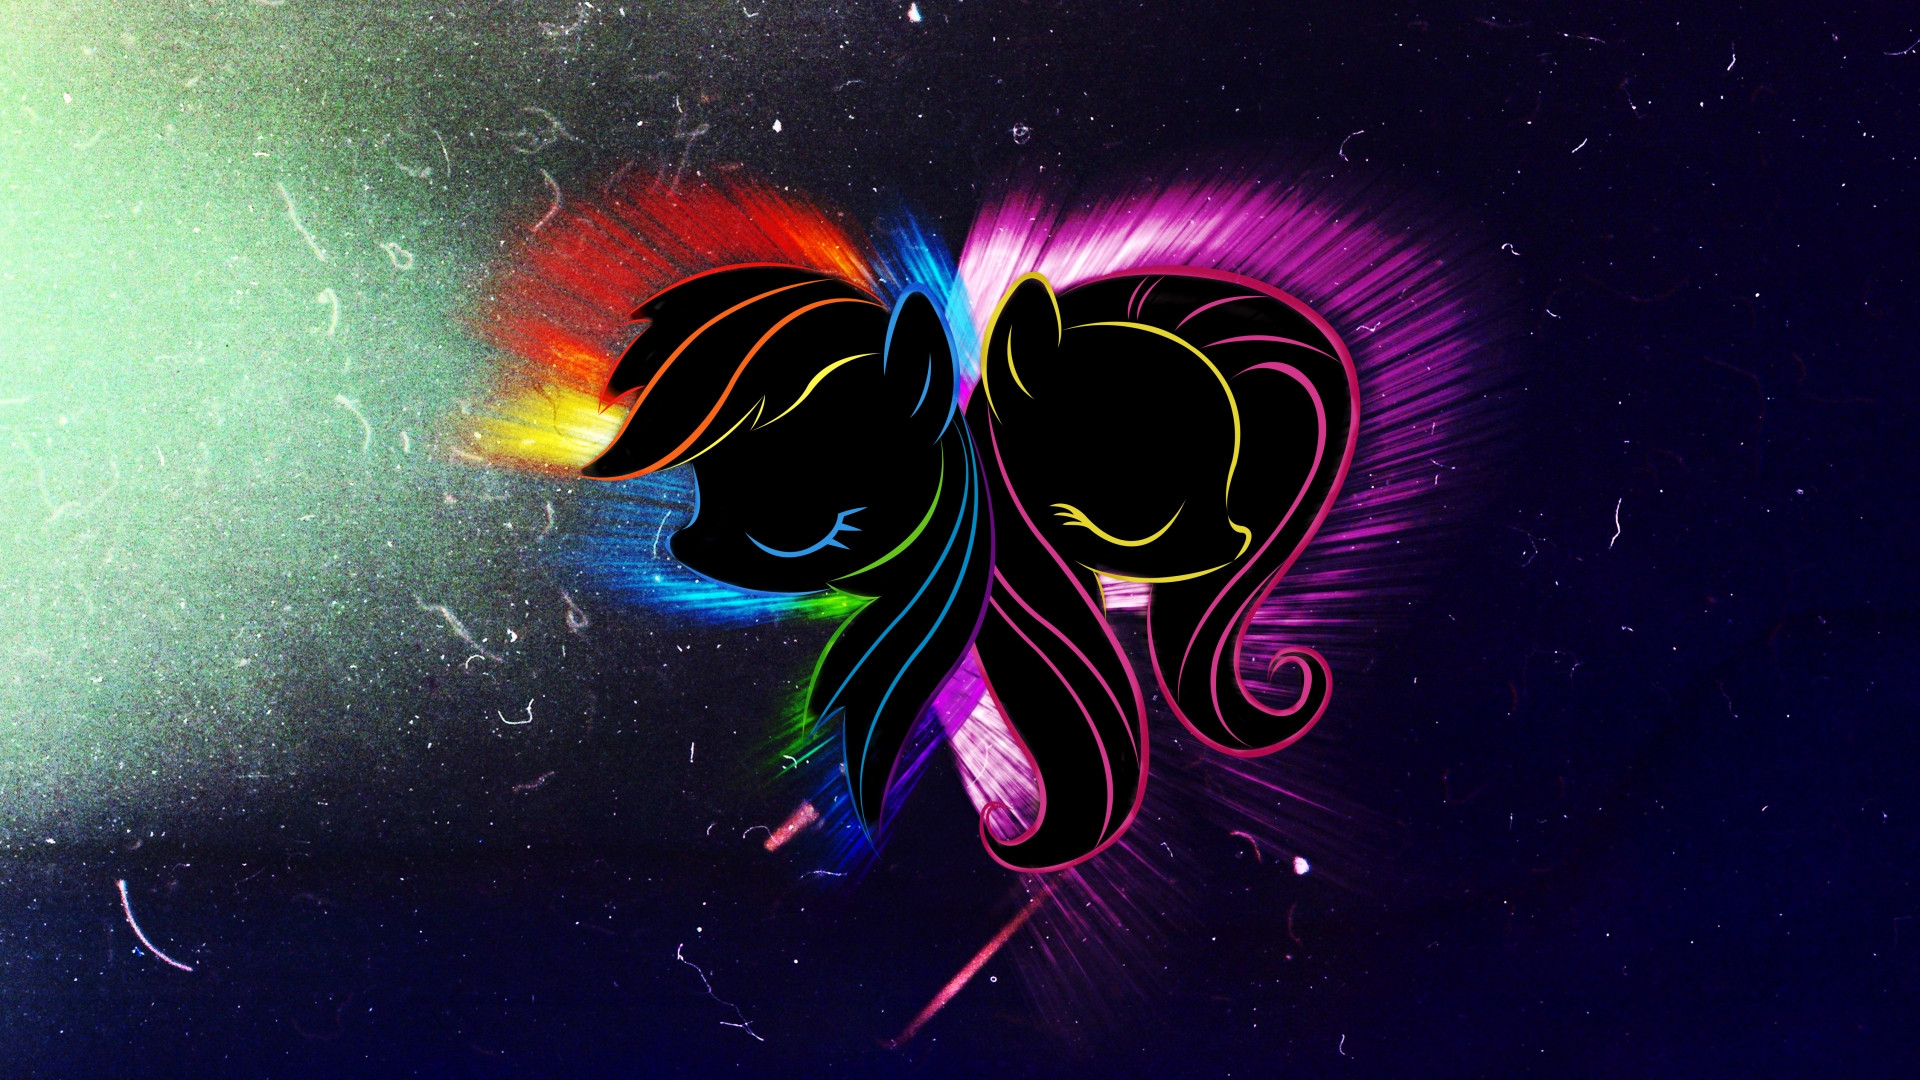 tv show, my little pony: friendship is magic, fluttershy (my little pony), my little pony, rainbow dash, vector